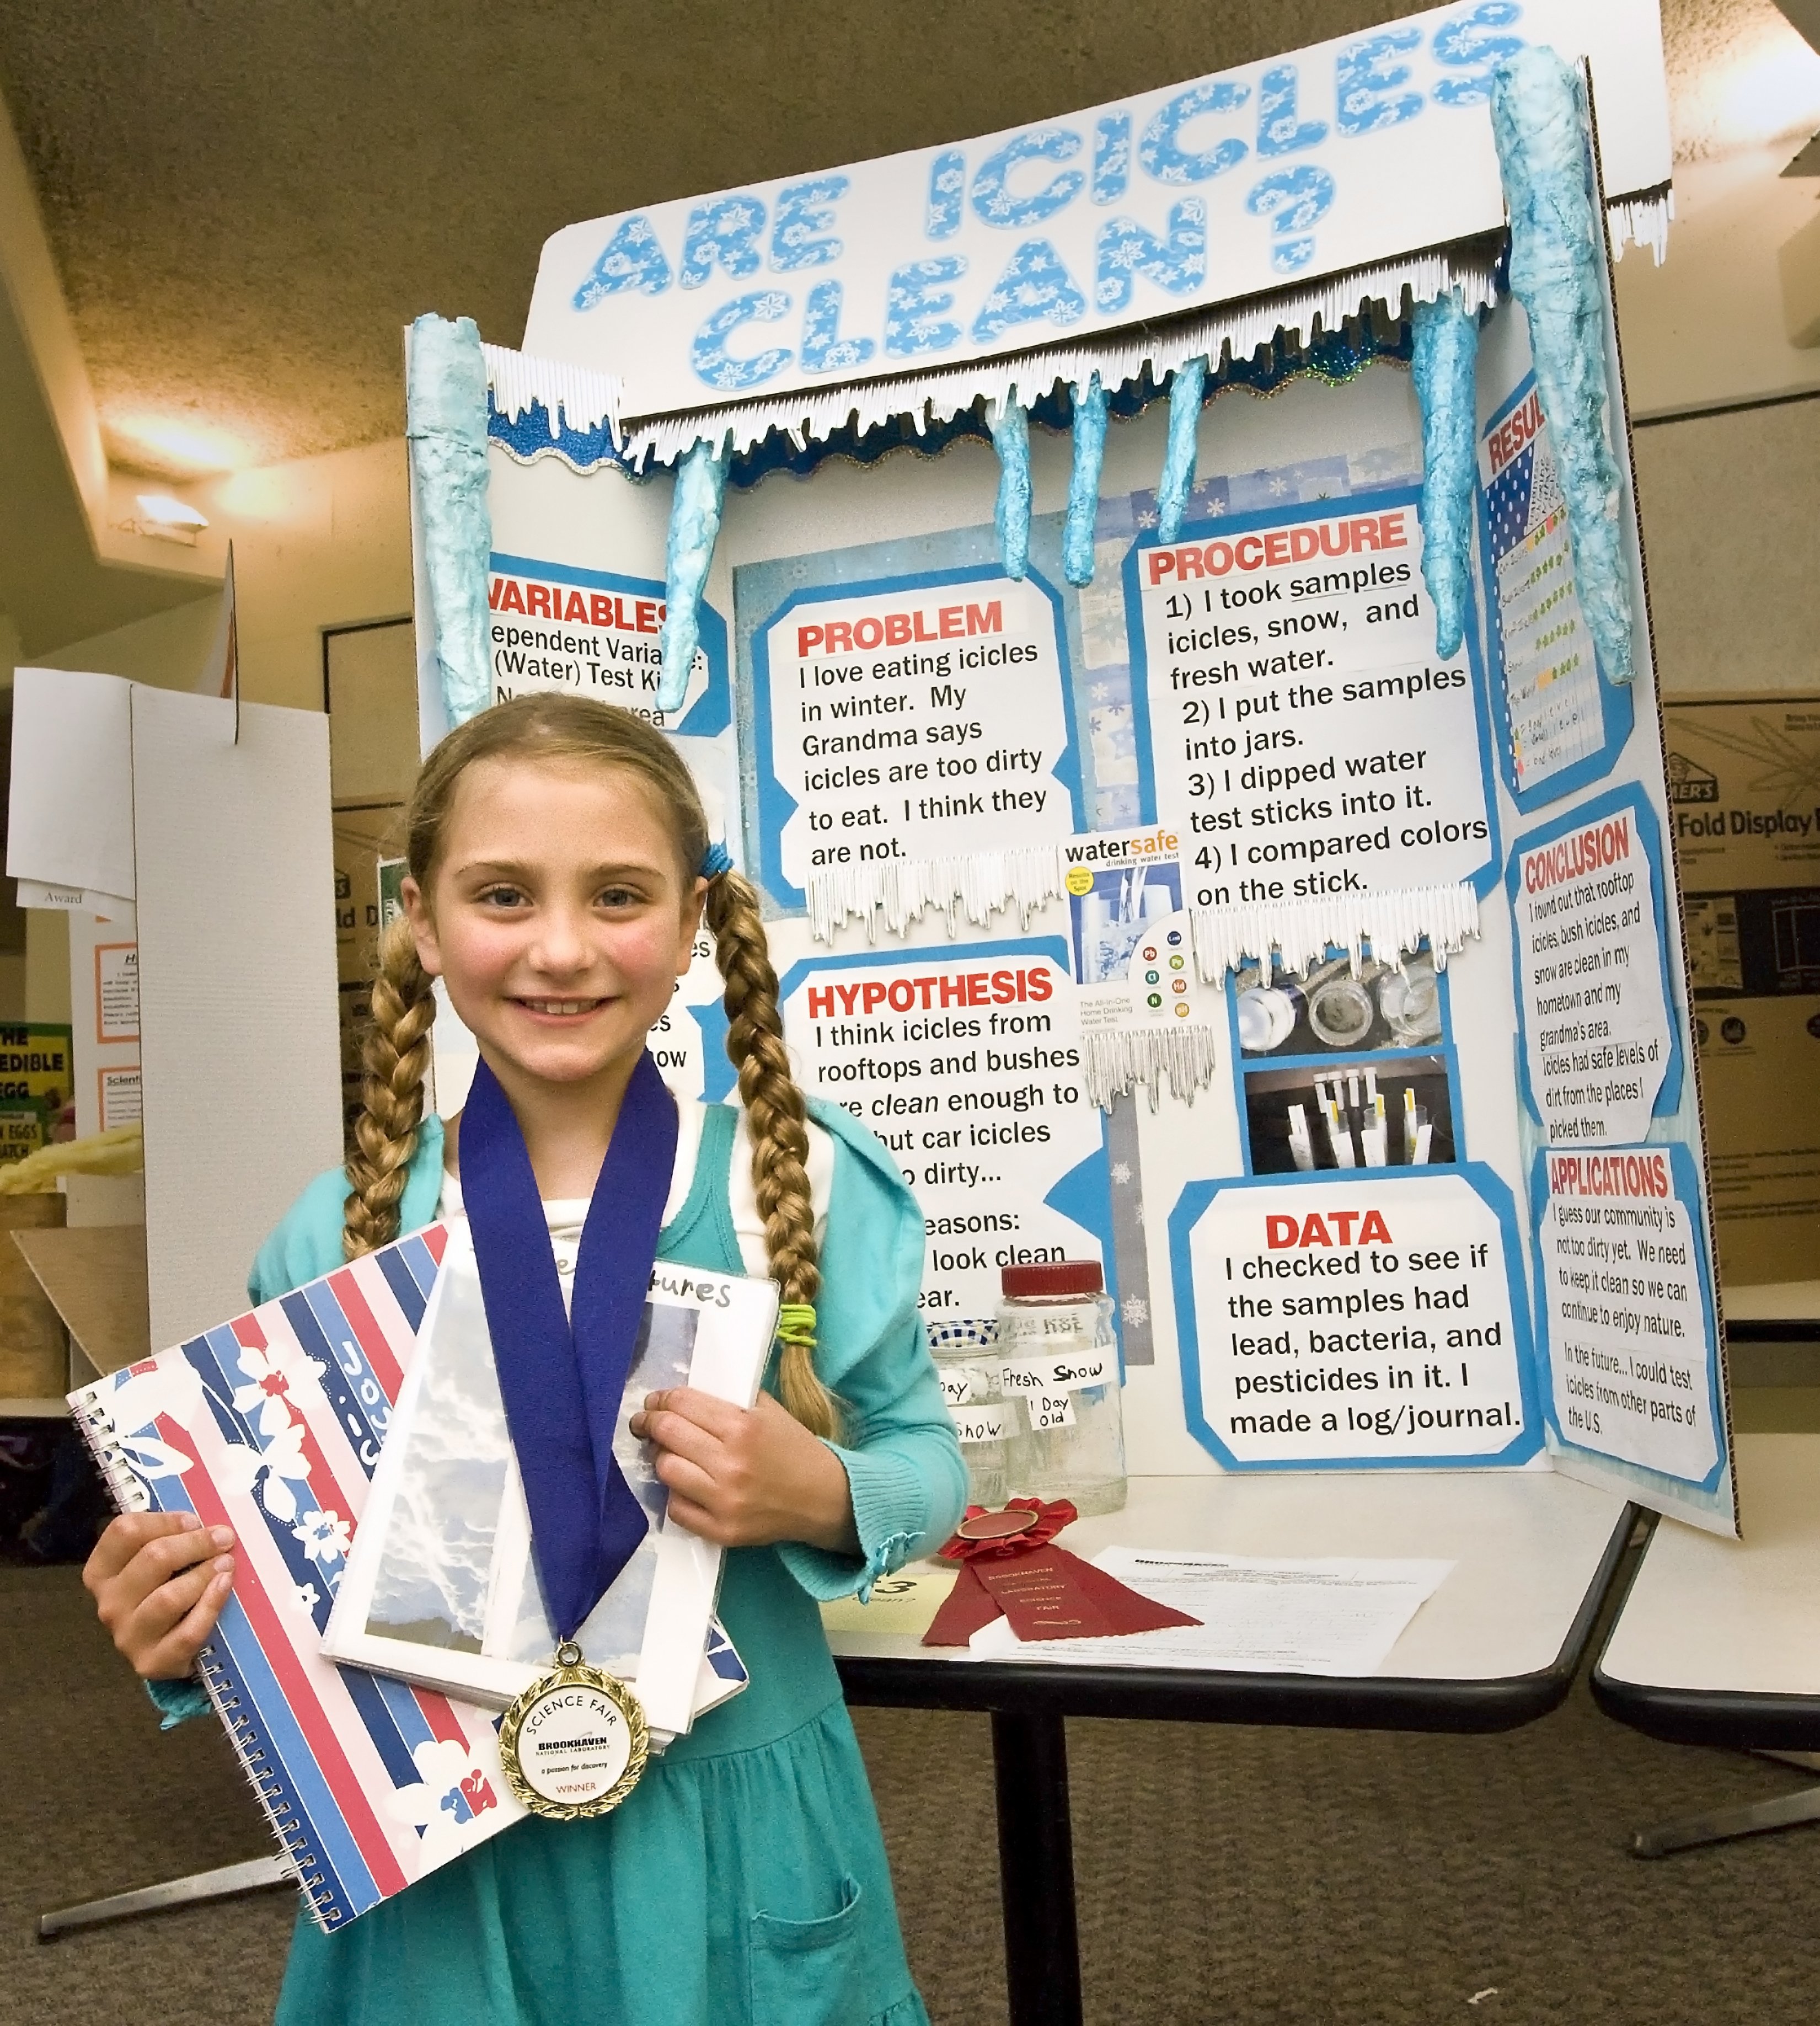 10 Stunning Award Winning Science Fair Project Ideas from ant control to wind energy winning projects at brookhaven 39 2022